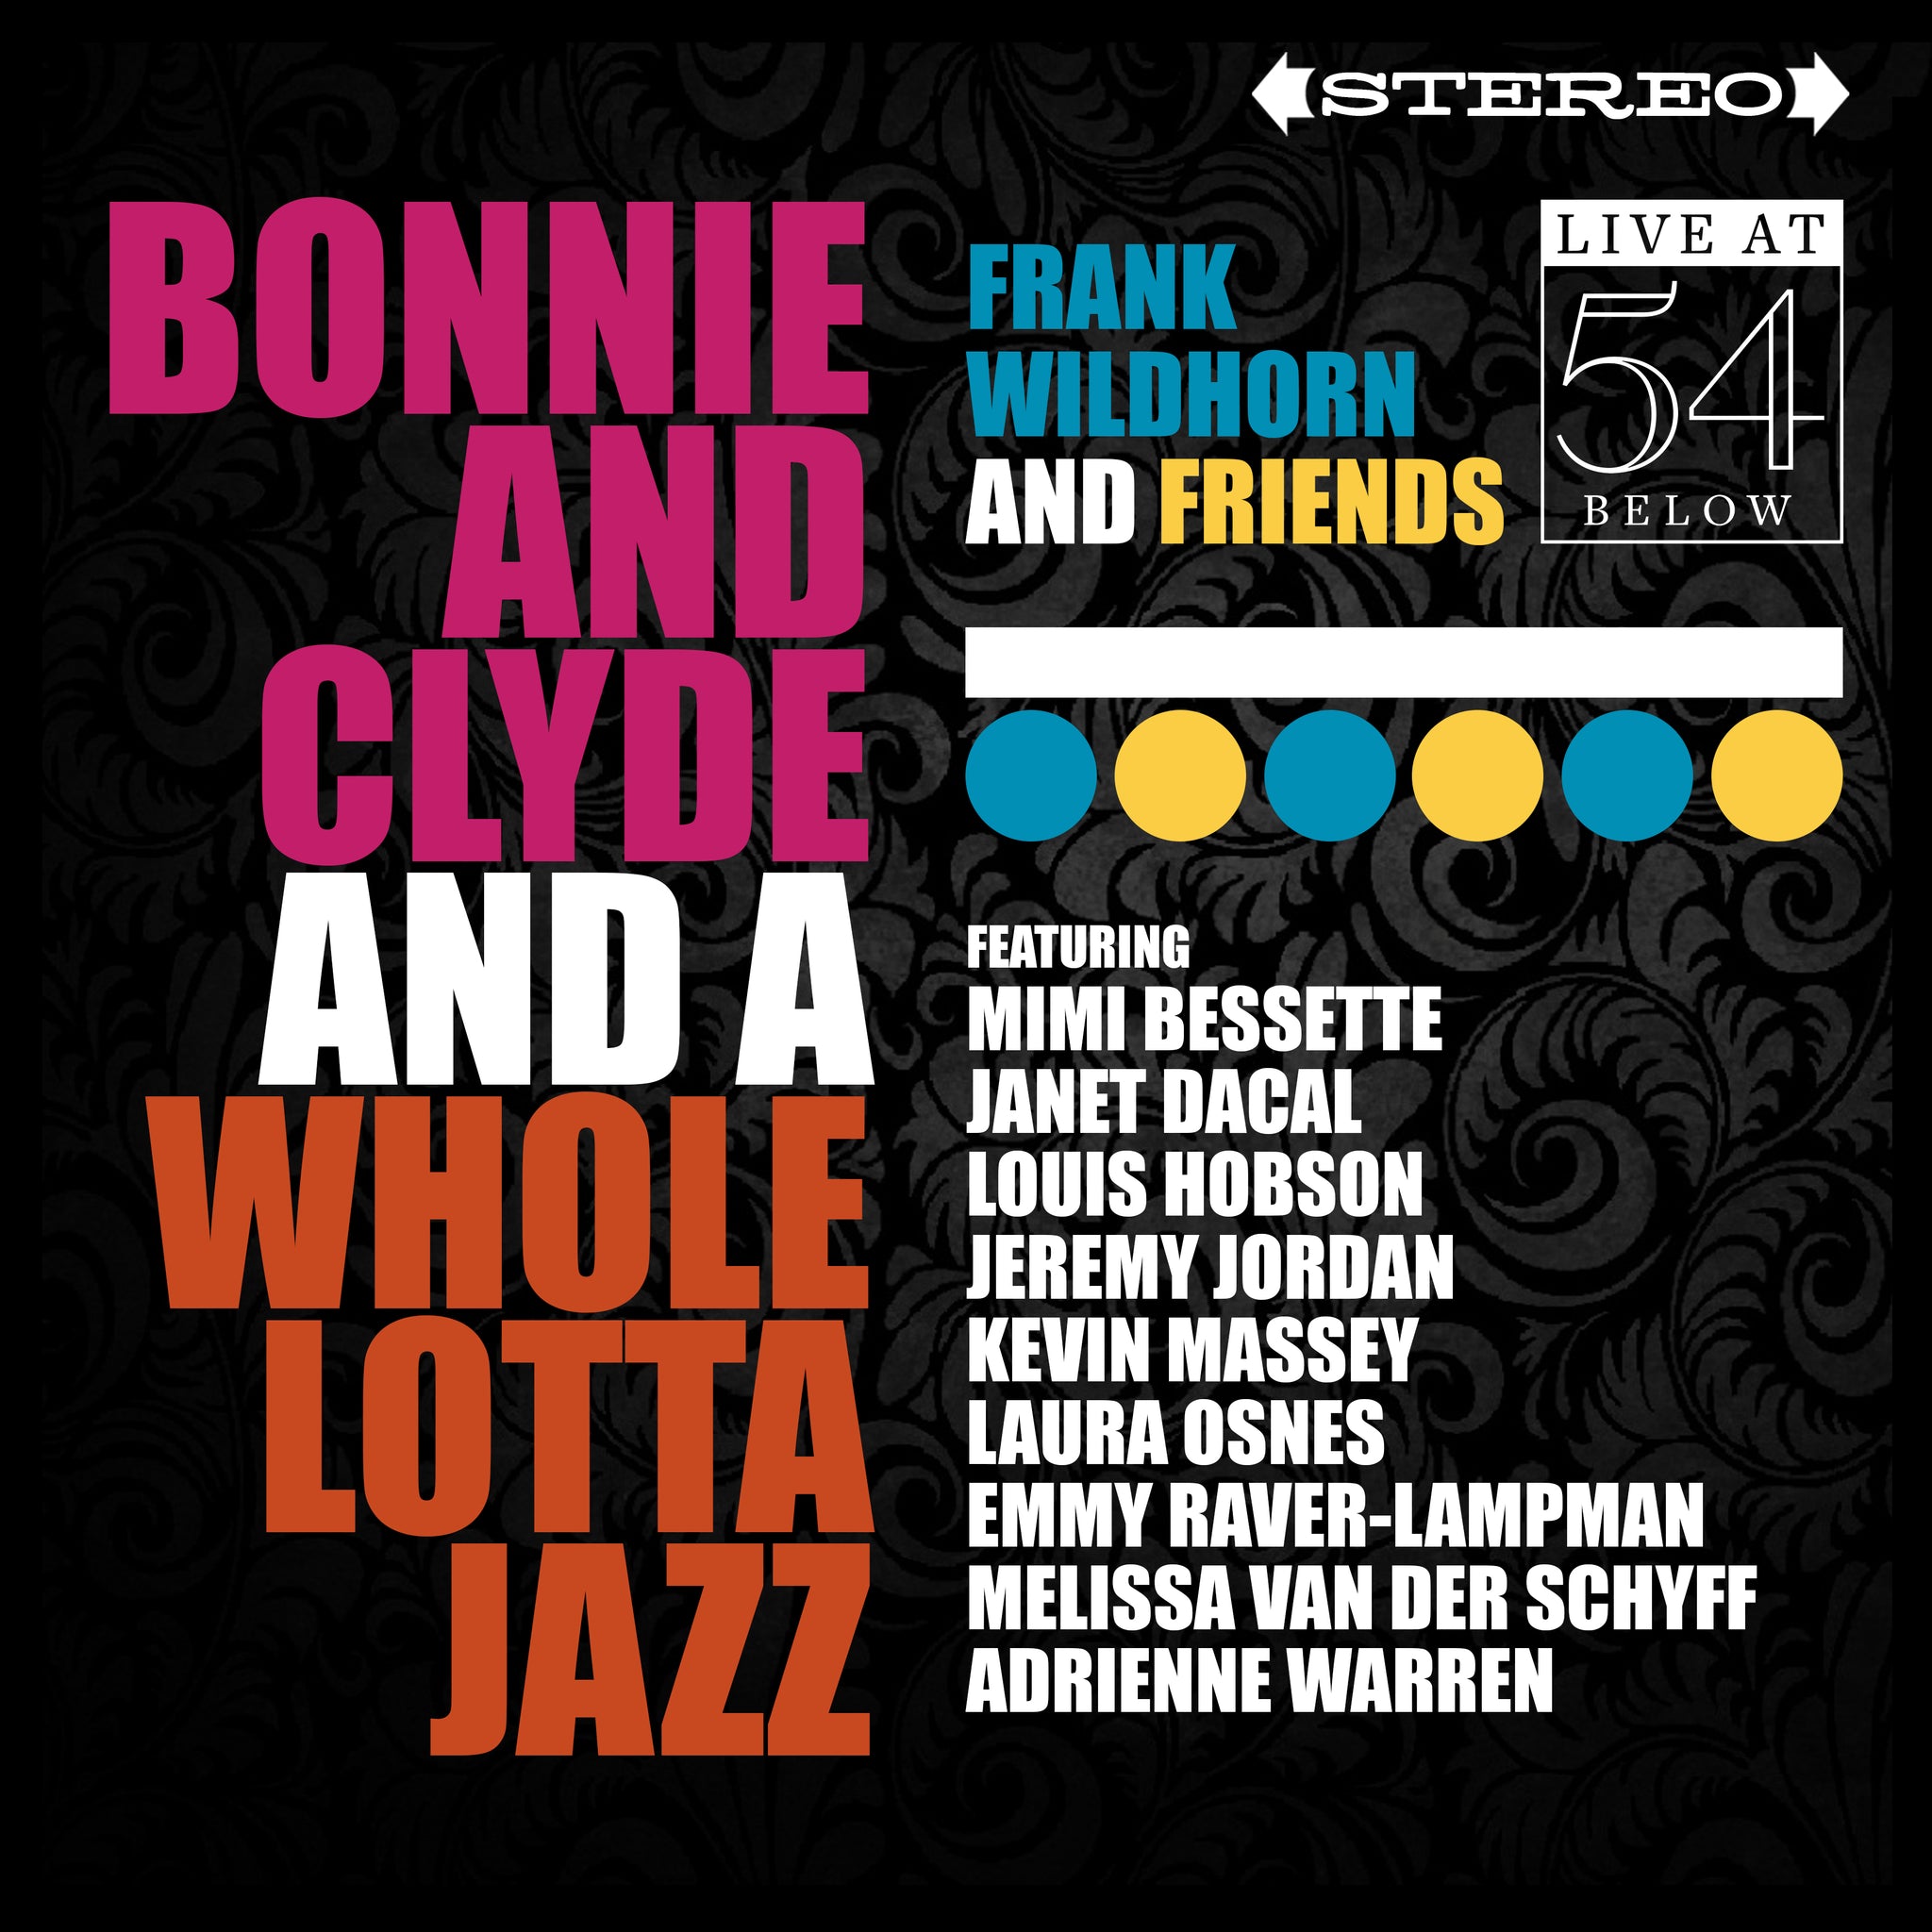 Frank Wildhorn & Friends: Bonnie & Clyde and a Whole Lotta Jazz – Live at 54 Below [CD]